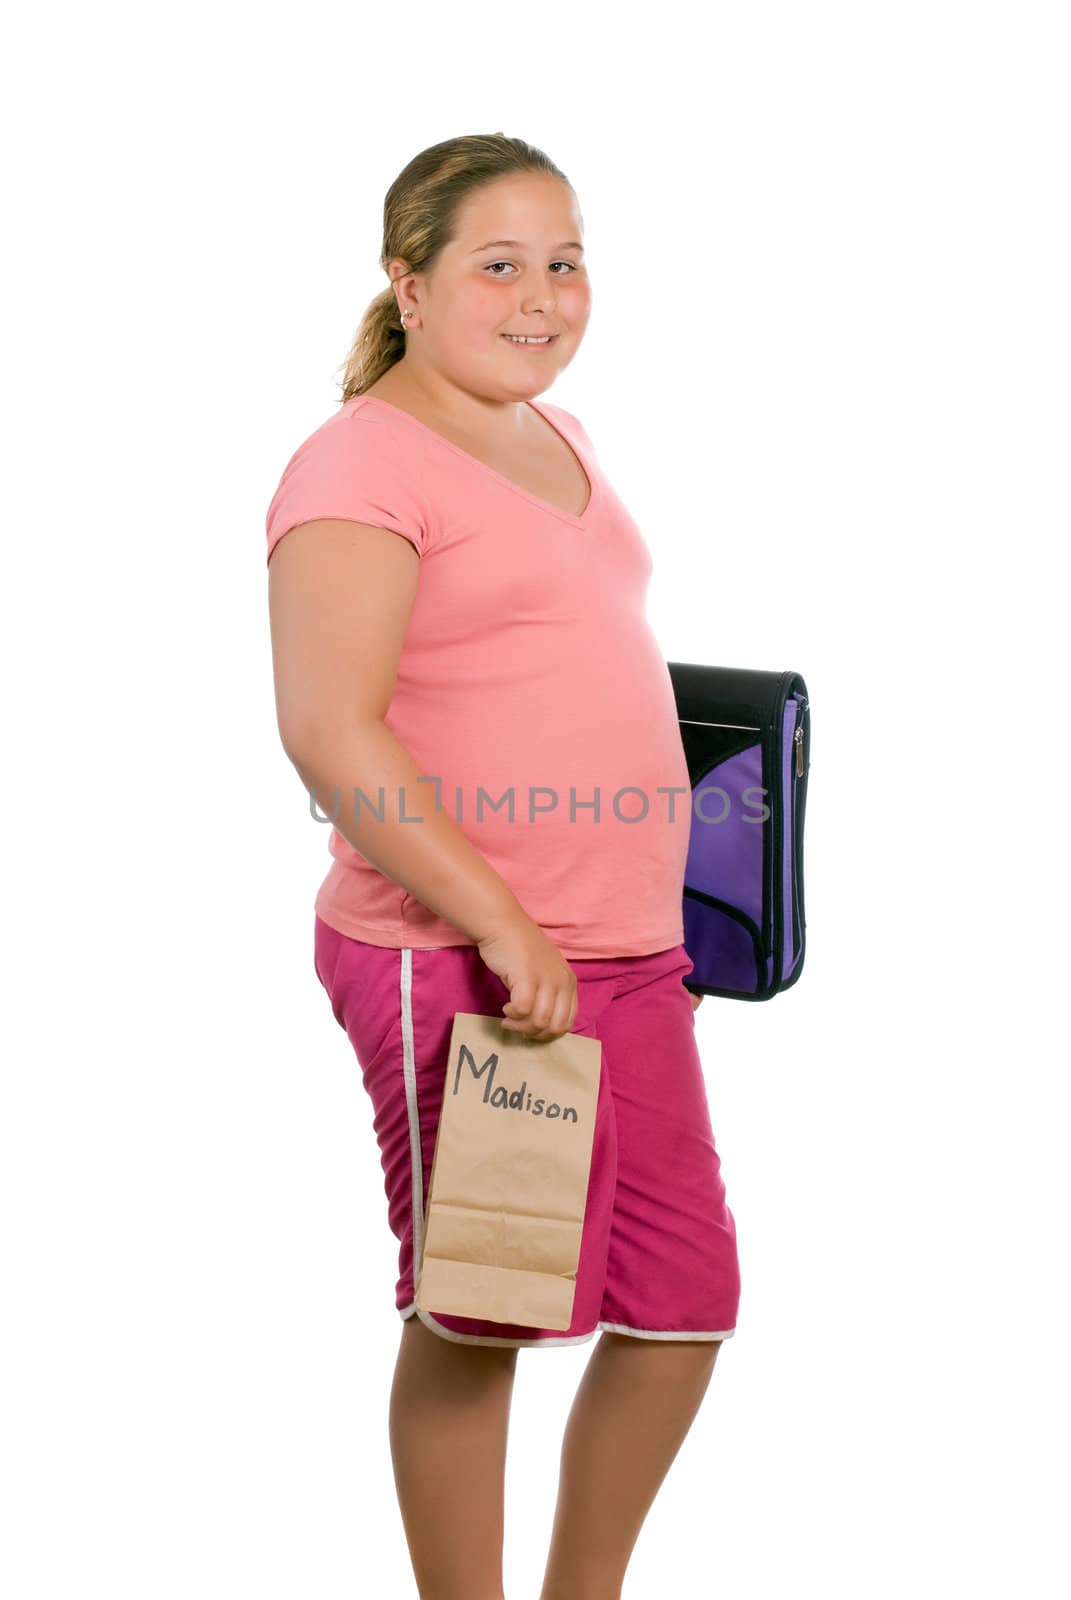 A preteen is holding her school binder and a brown paper lunch bag and is off to school, isolated against a white background - artificial name on the lunchbag